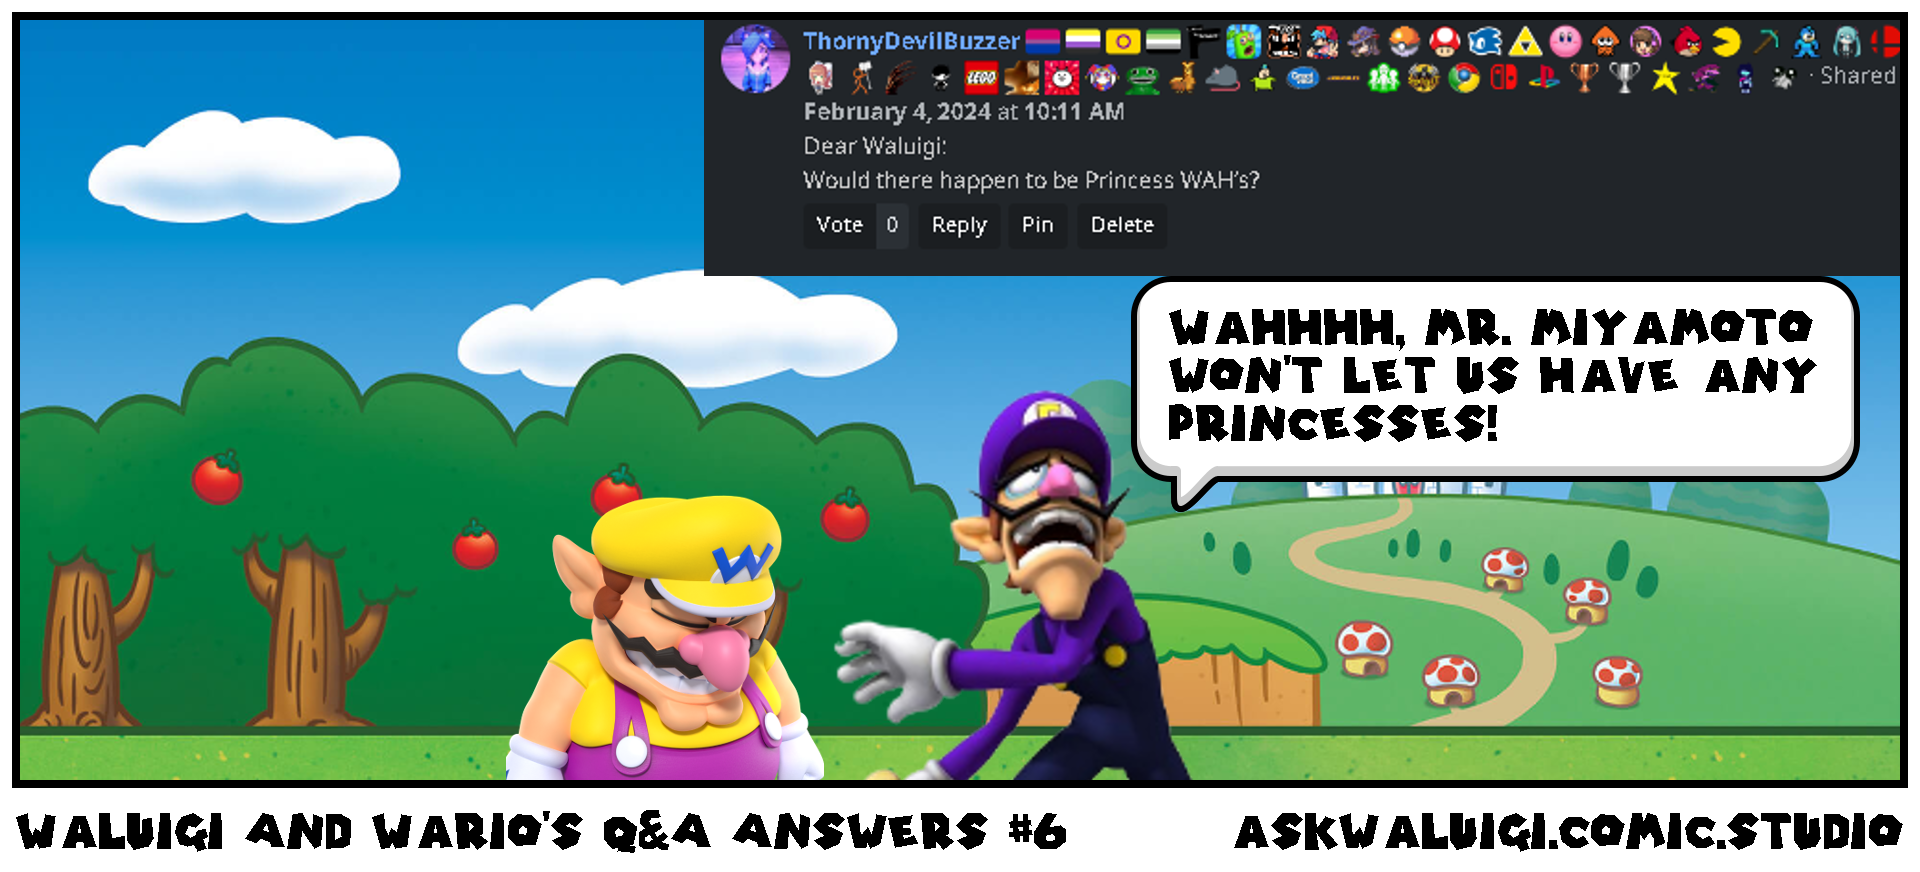 Waluigi And Wario's Q&A Answers #6